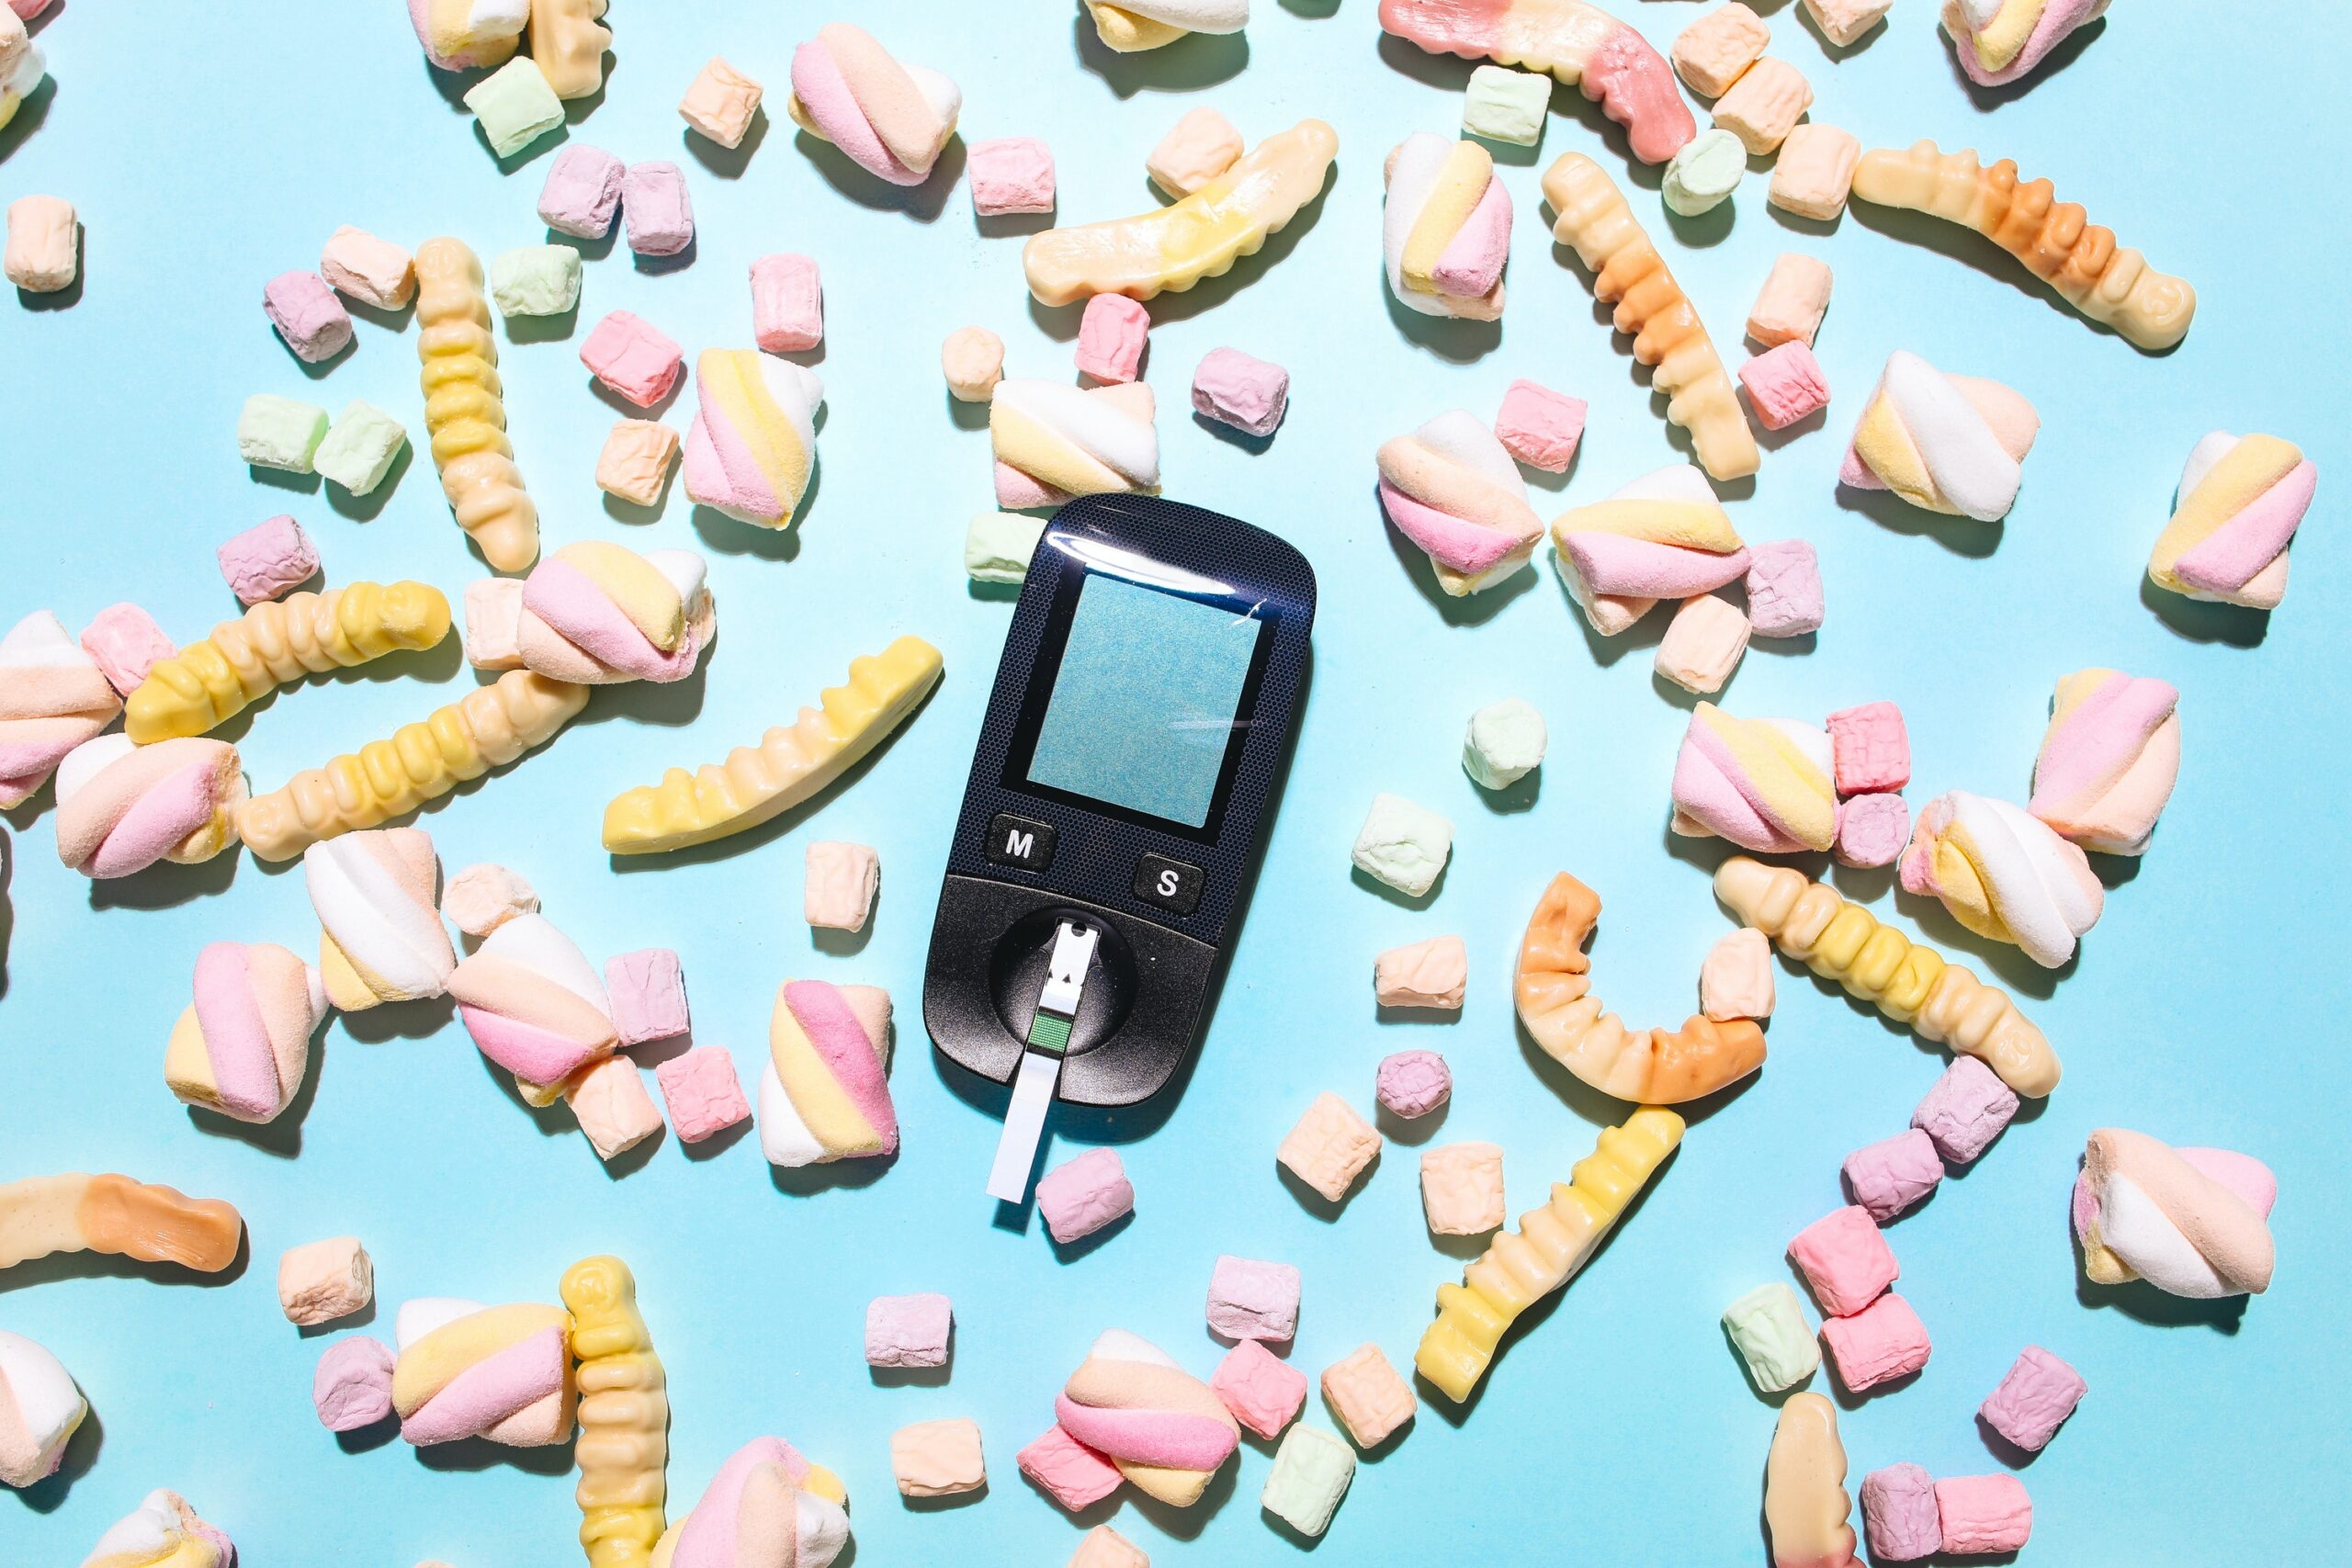 A glucose meter surrounded by sweets.